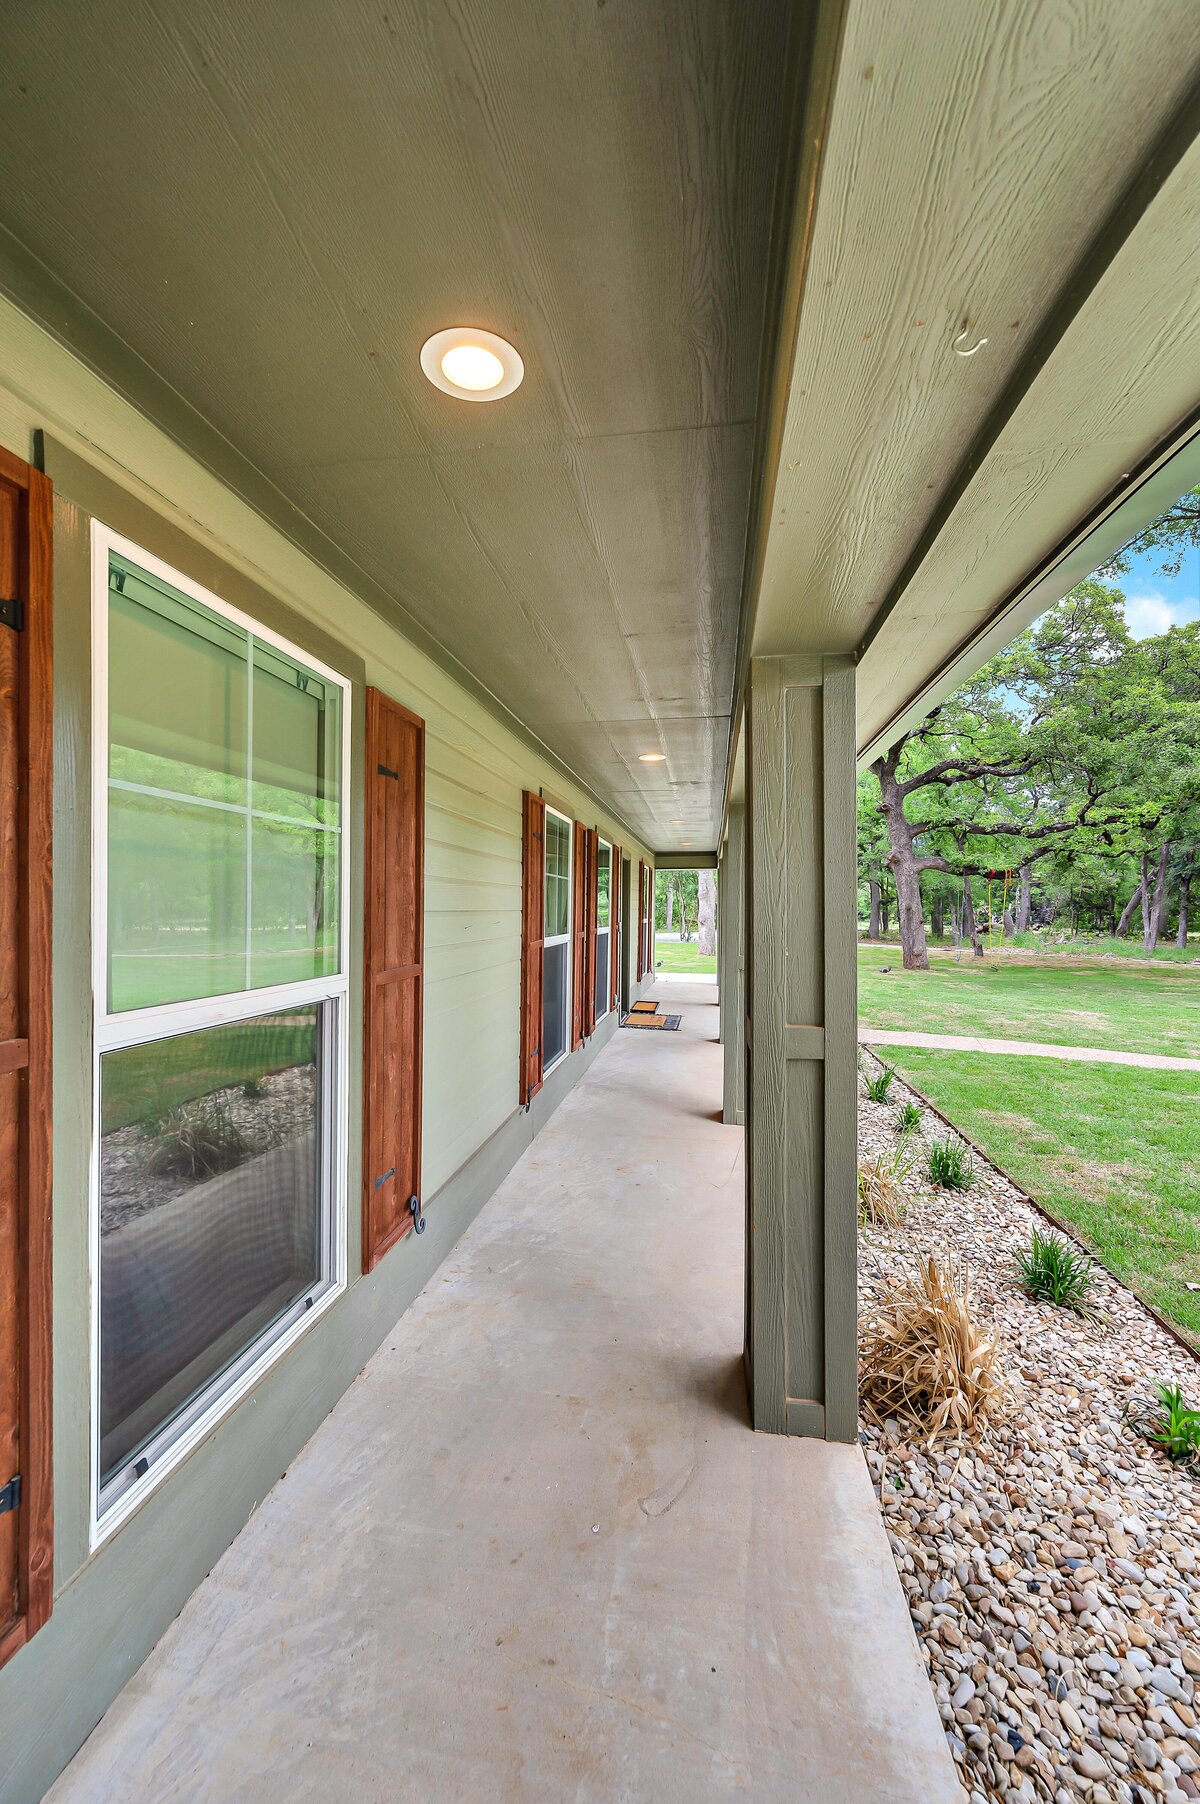 Beautiful front porch of this three-bedroom, three-bathroom vacation rental home with free wifi, outdoor theater, hot tub, propane grill and private yard in Waco, TX.